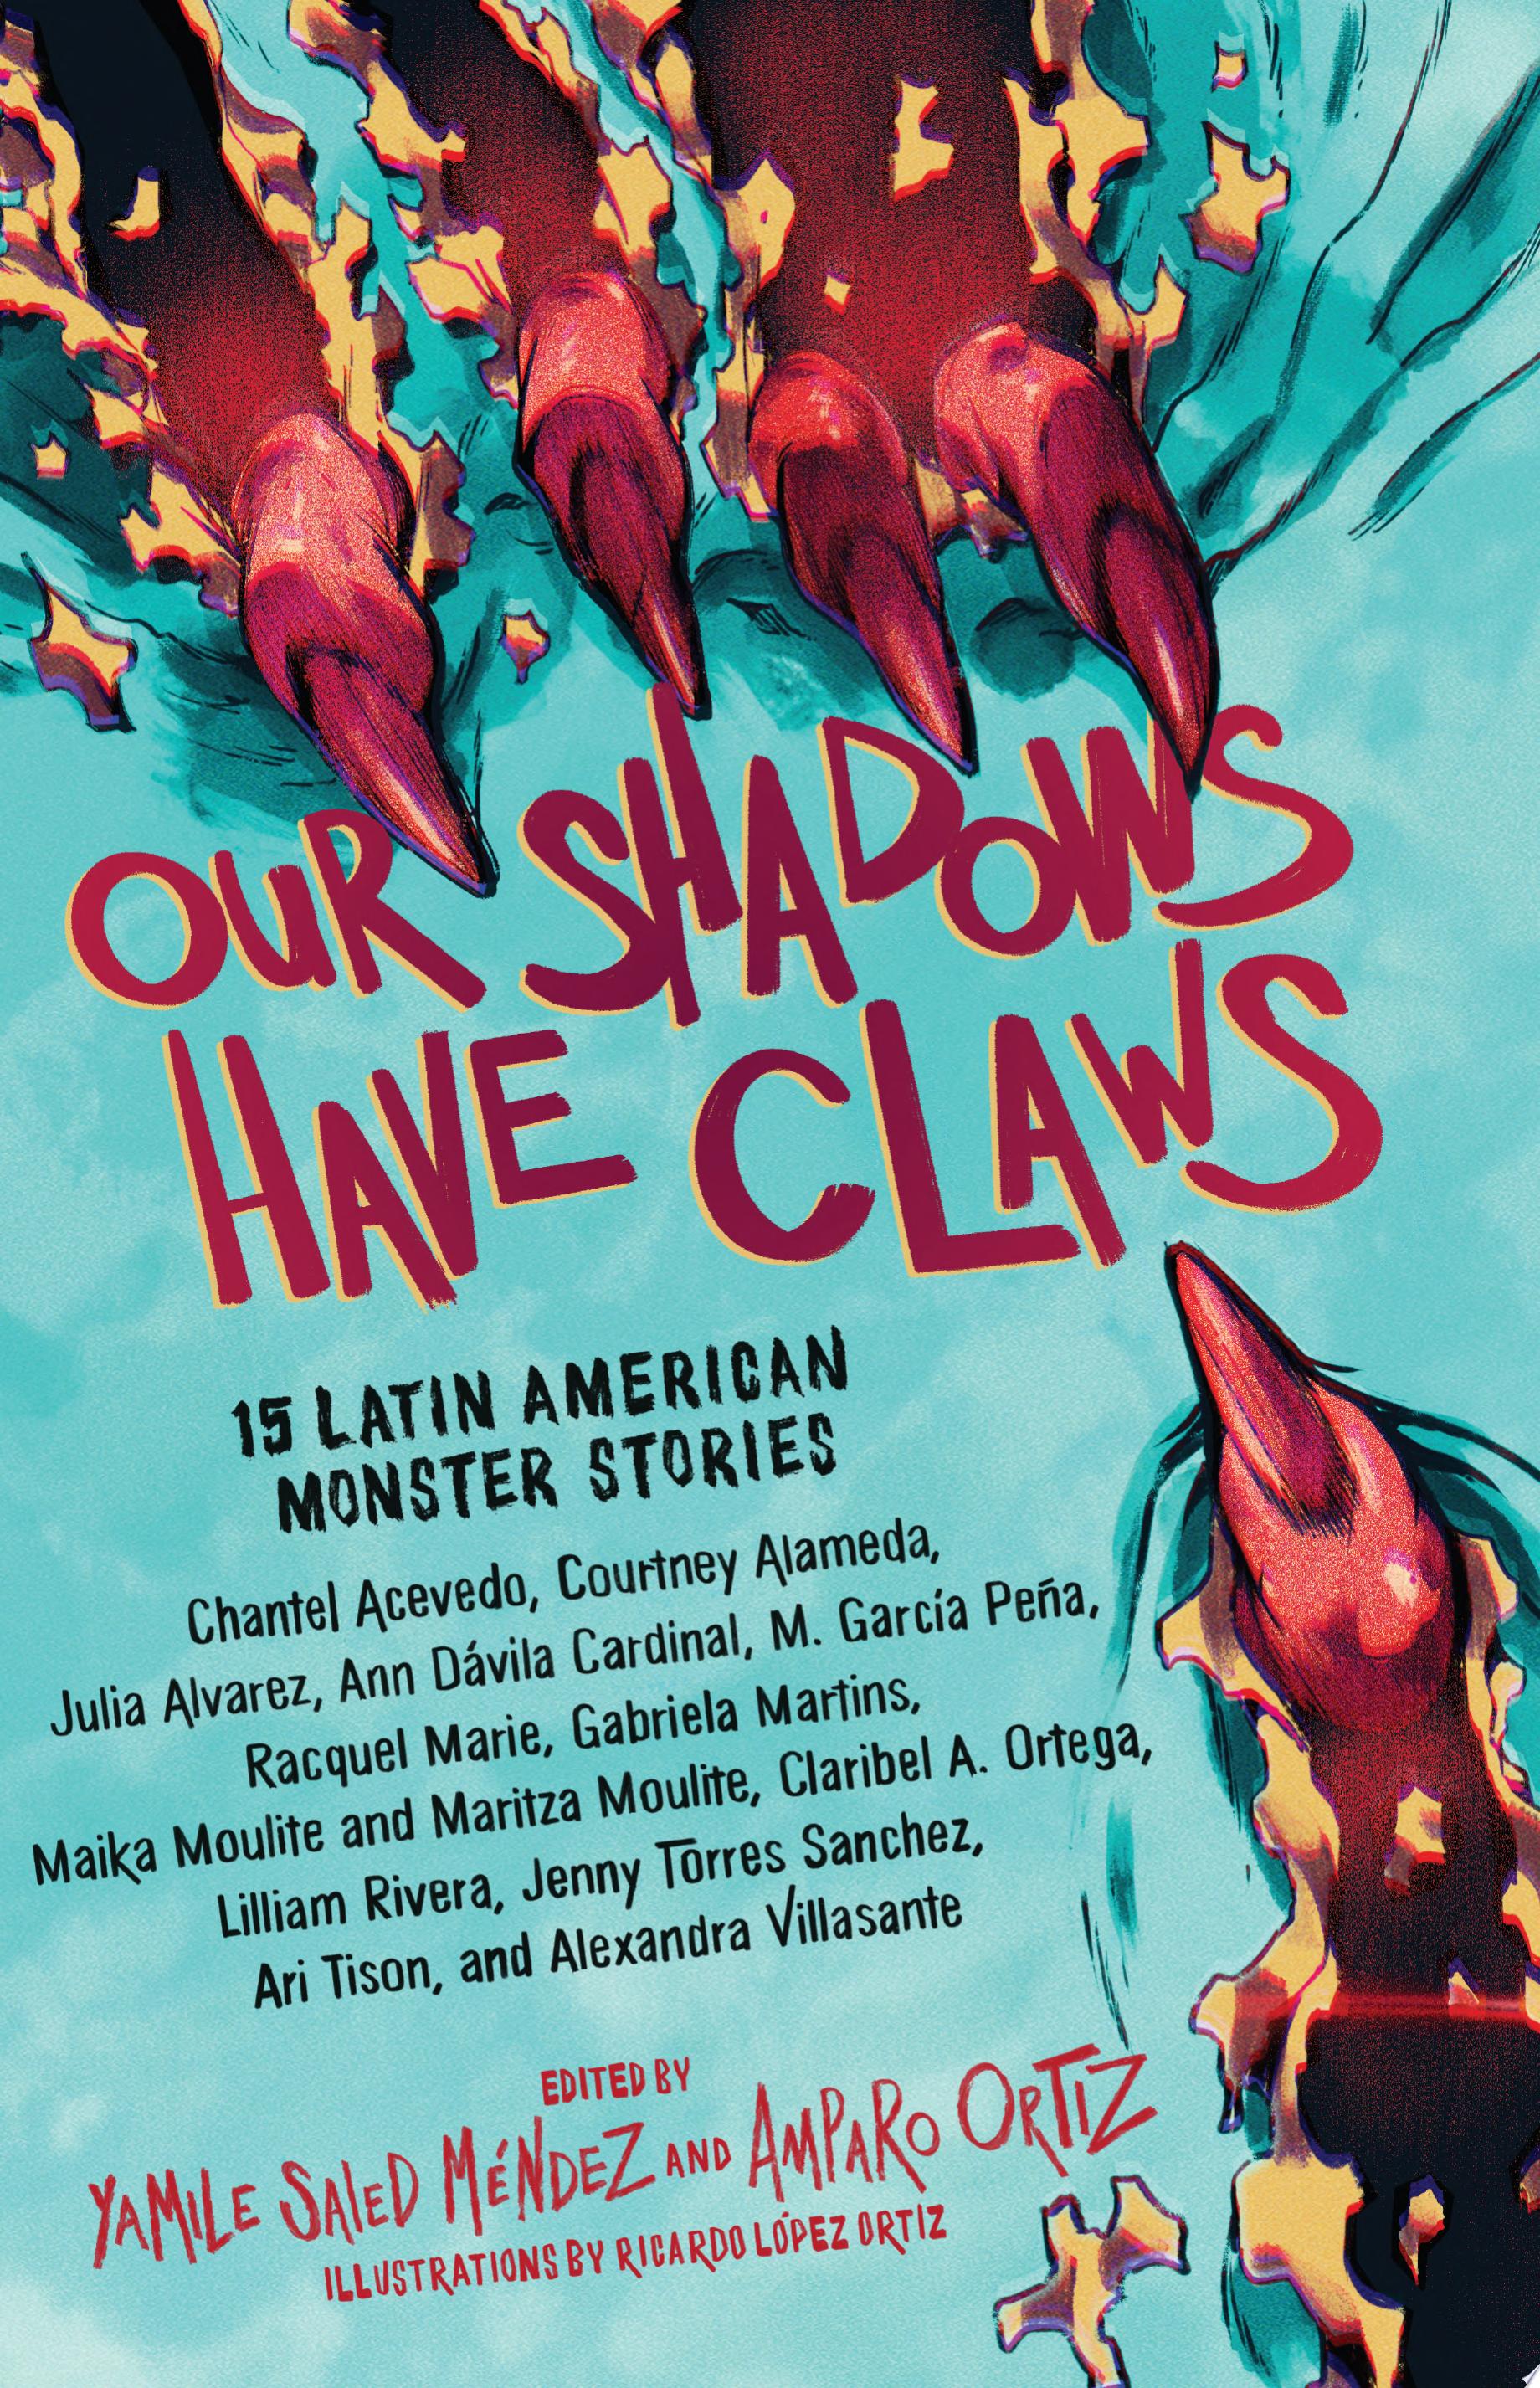 Image for "Our Shadows Have Claws"